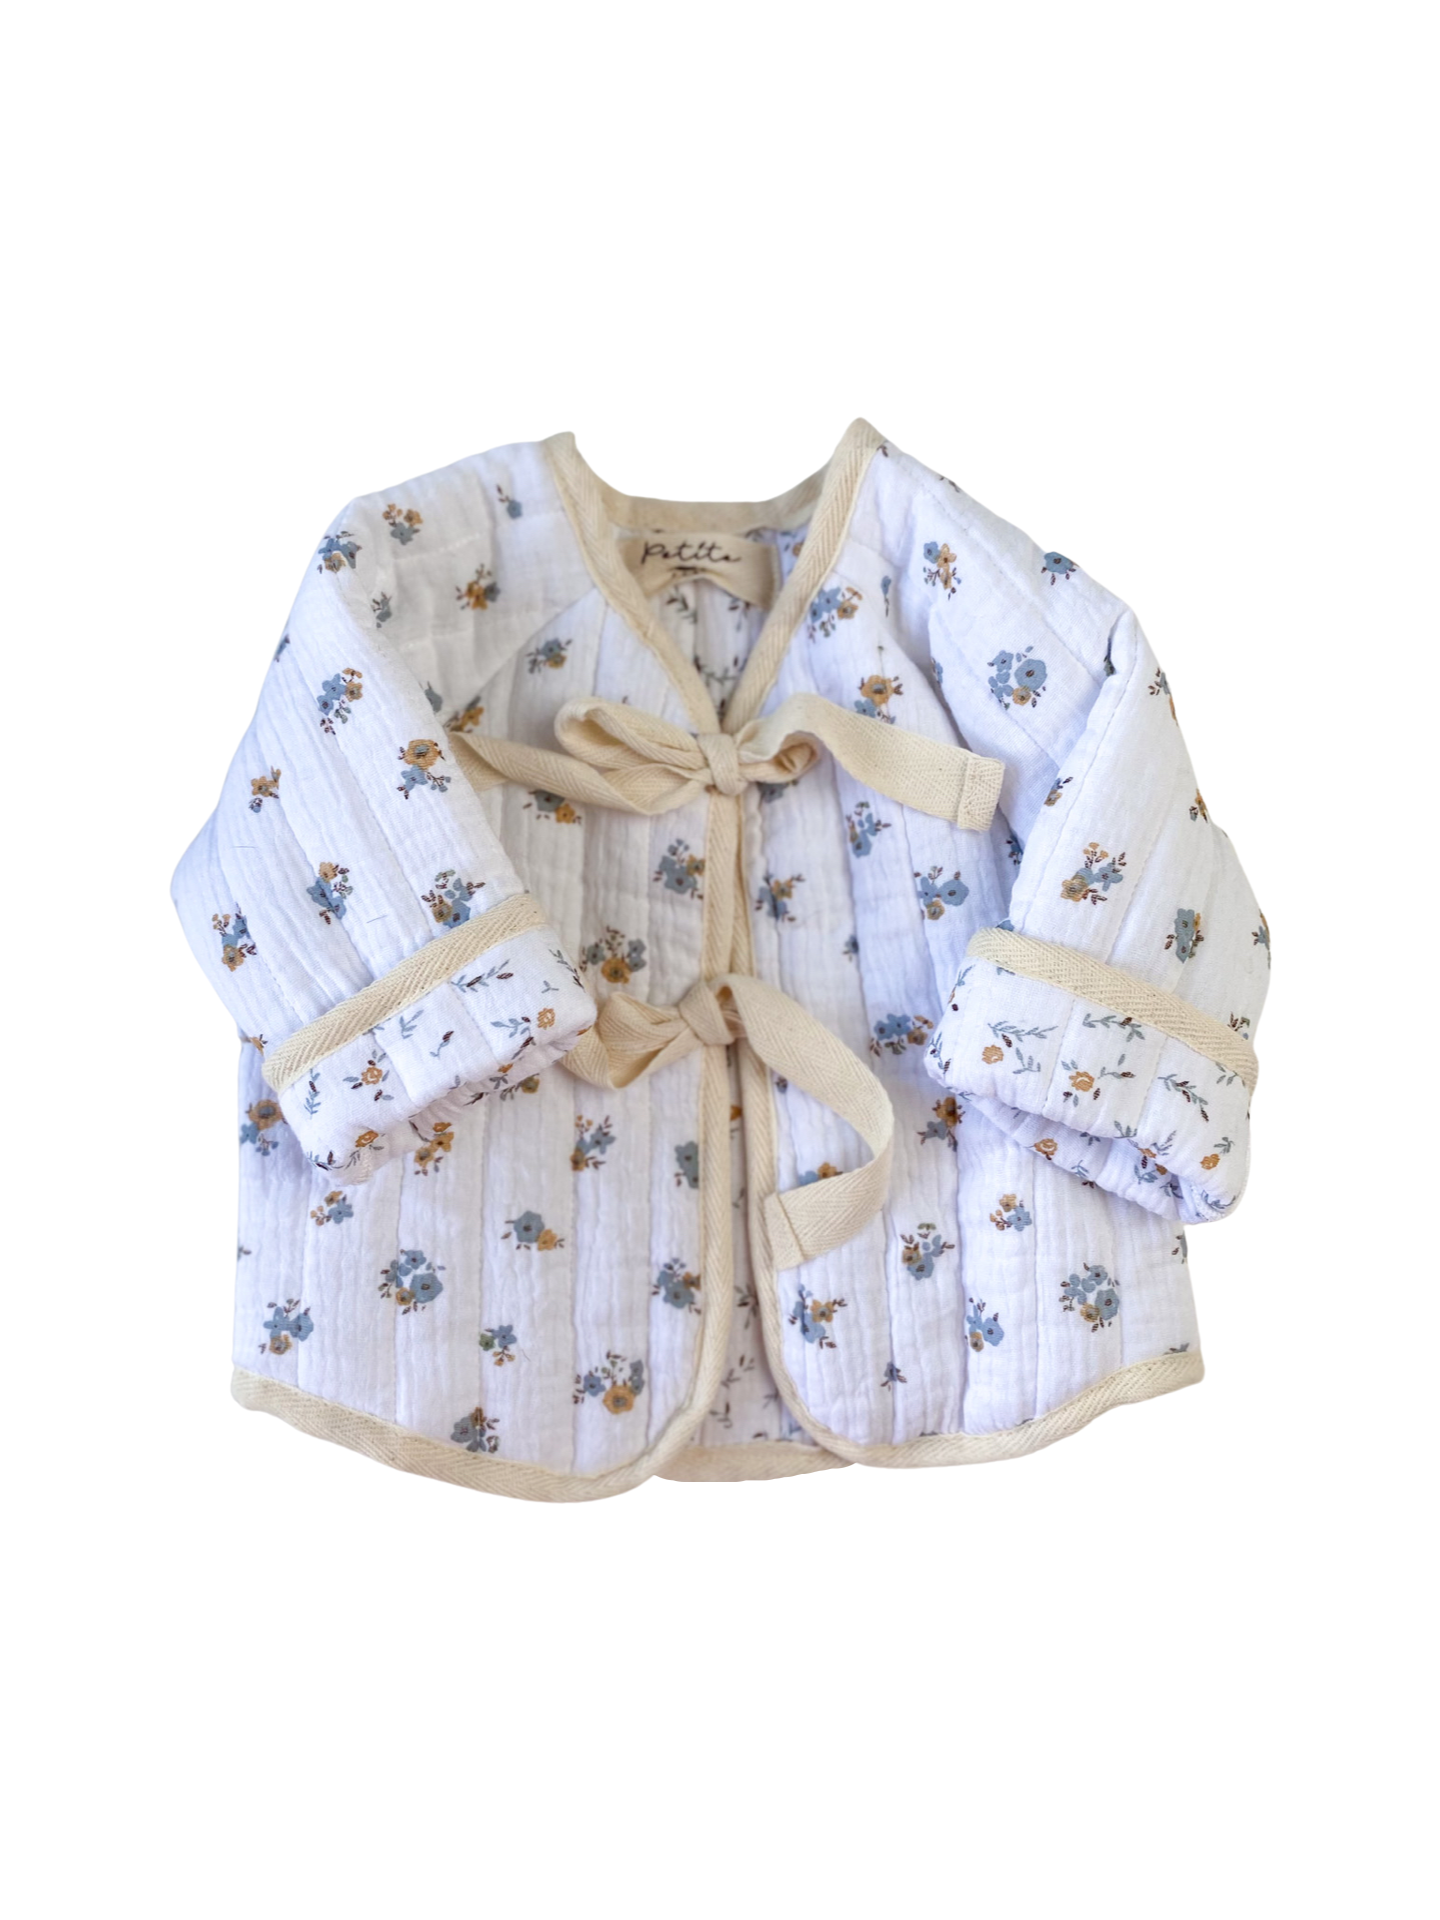 Baby & toddler quilted jacket / blue floral